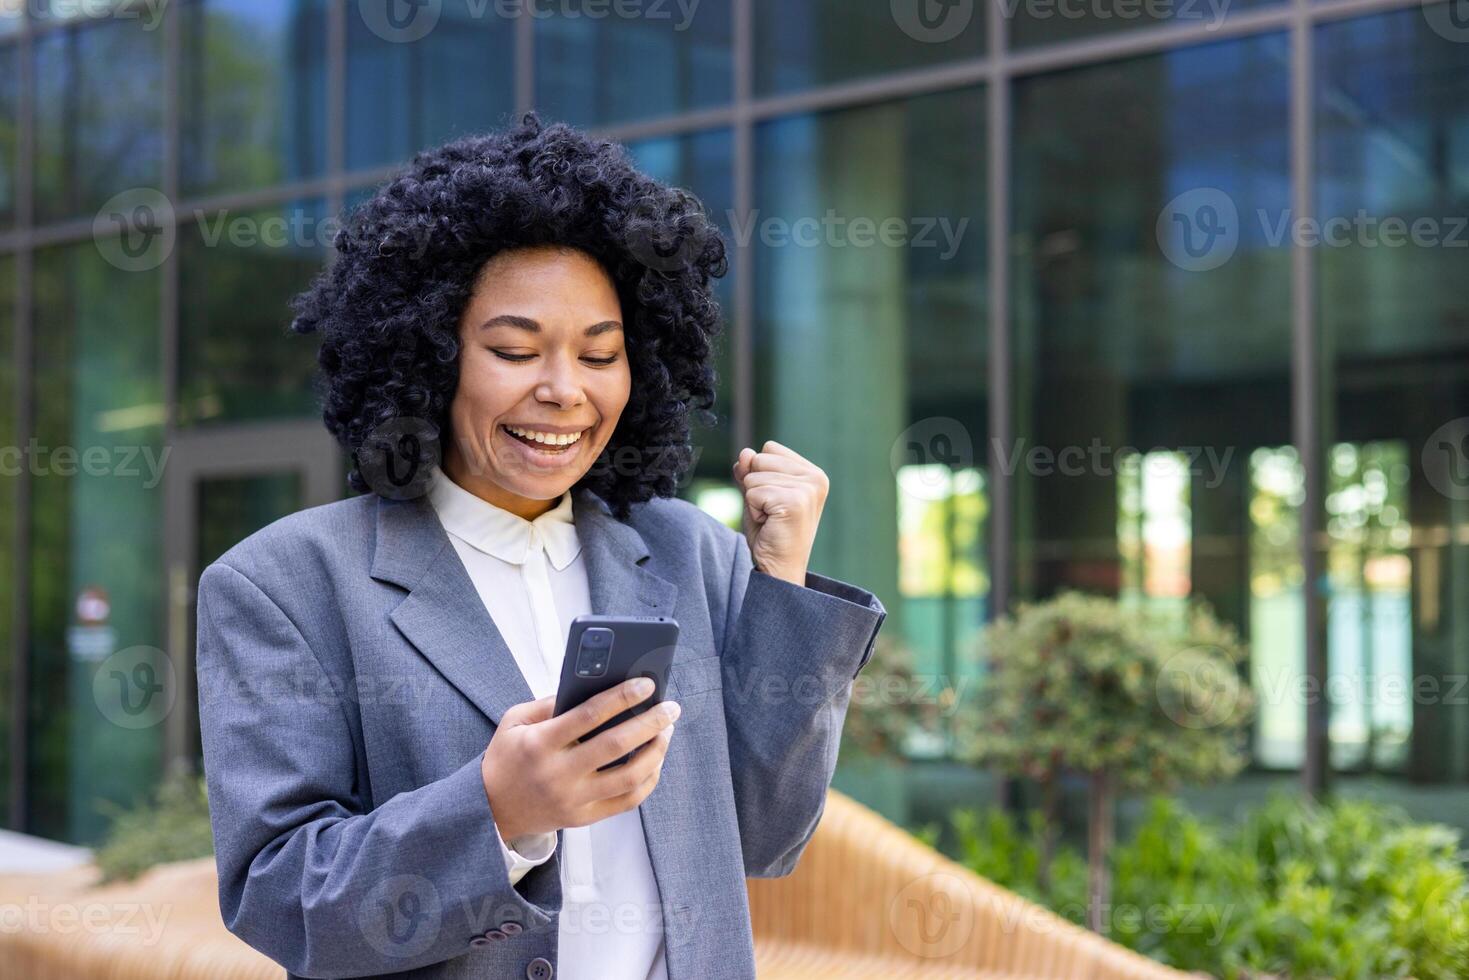 Close-up photo of young African American woman in suit standing near office center, holding and looking at mobile phone, happy showing victory gesture with hand.